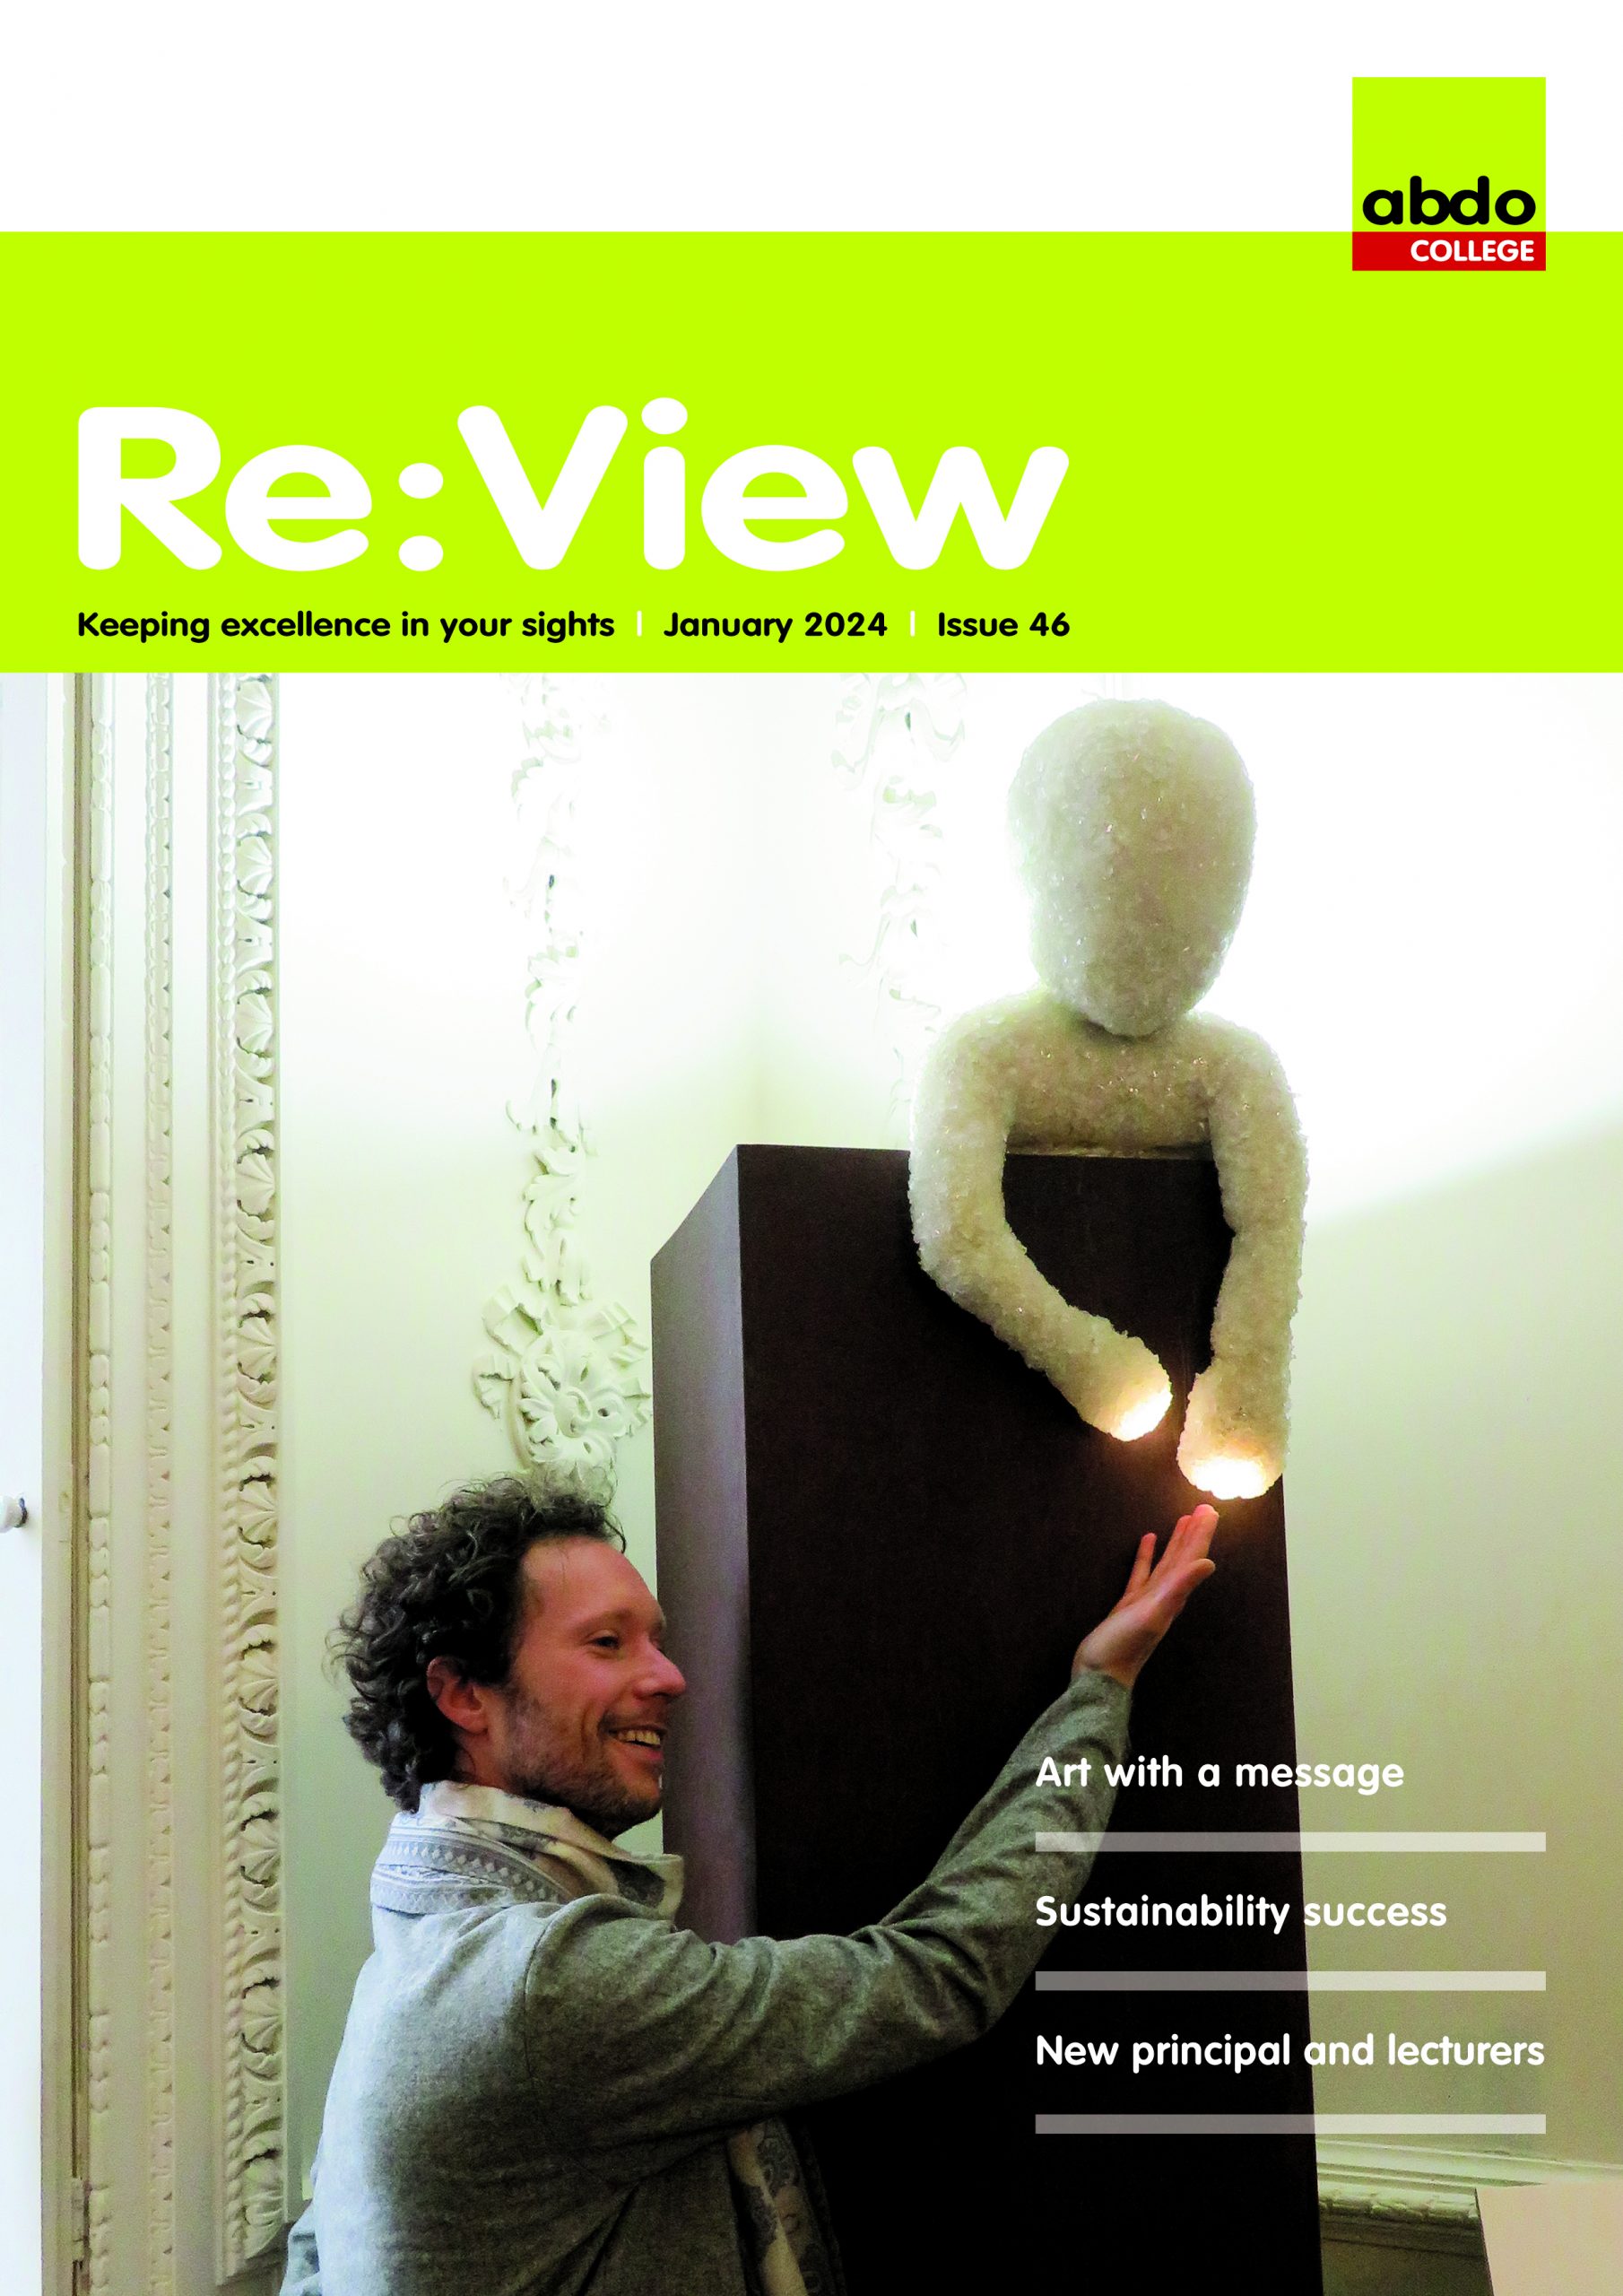 Re:View January 2024 - ABDO College